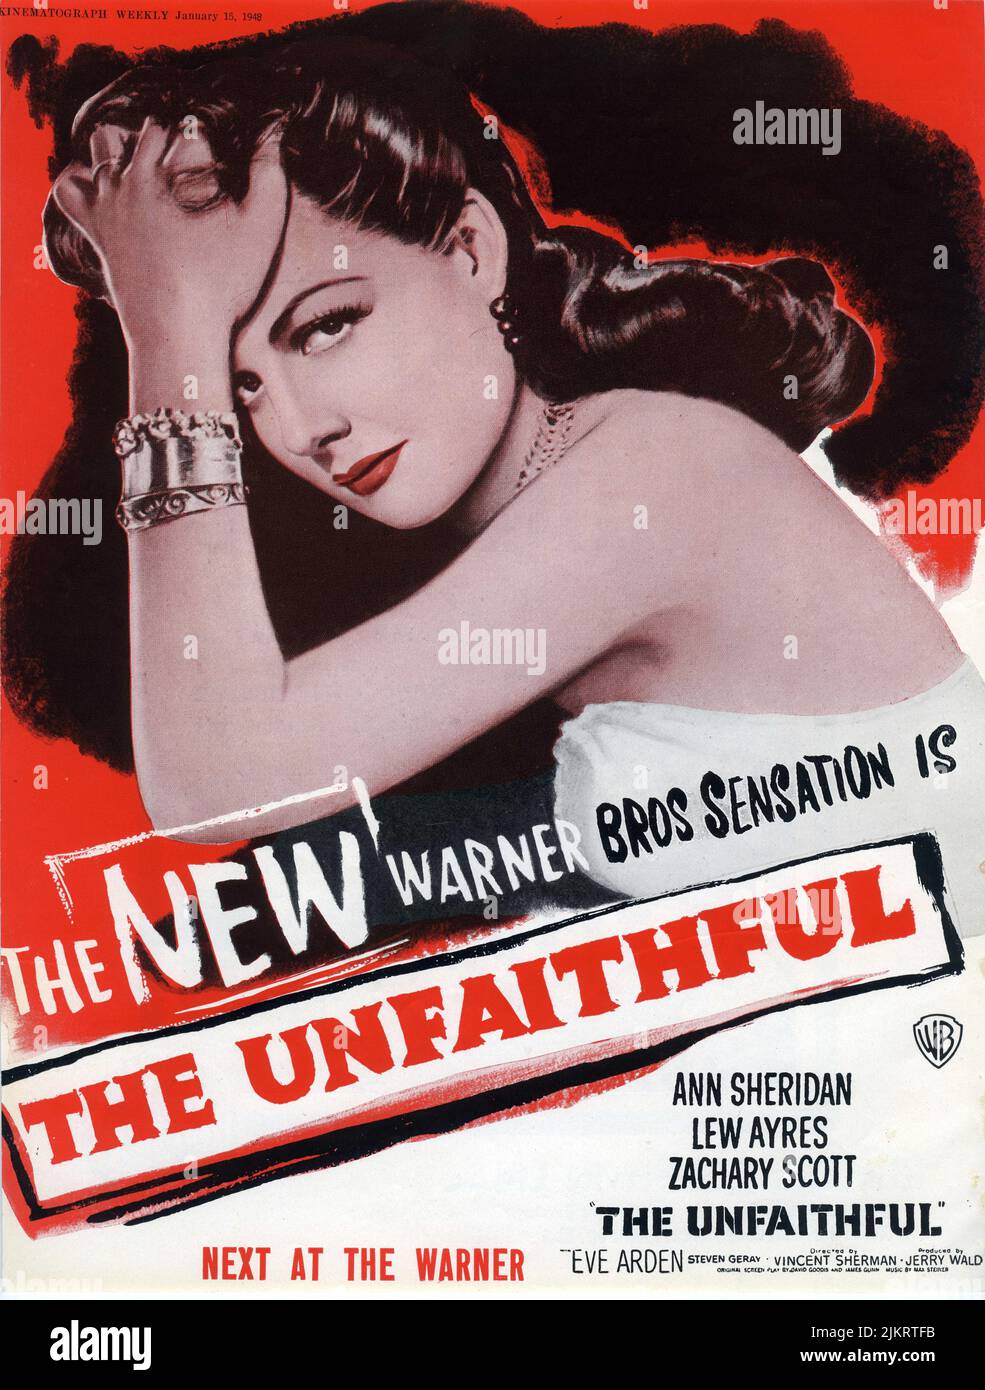 ANN SHERIDAN in THE UNFAITHFUL 1947 director VINCENT SHERMAN novel W. Somerset Maugham music Max Steiner producer Jerry Wald Warner Bros. Stock Photo